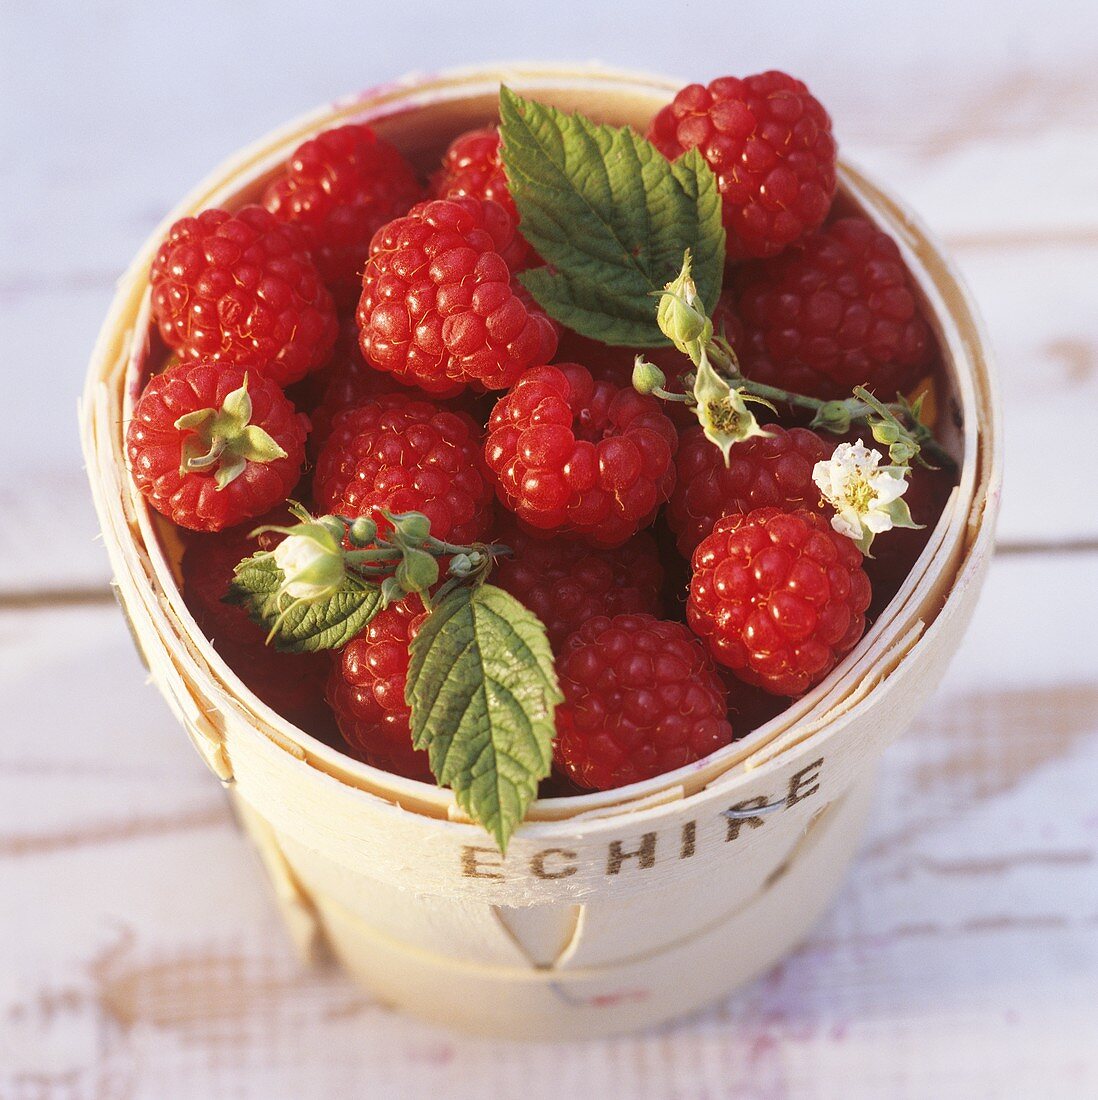 Raspberries with leaves and flowers in chip basket